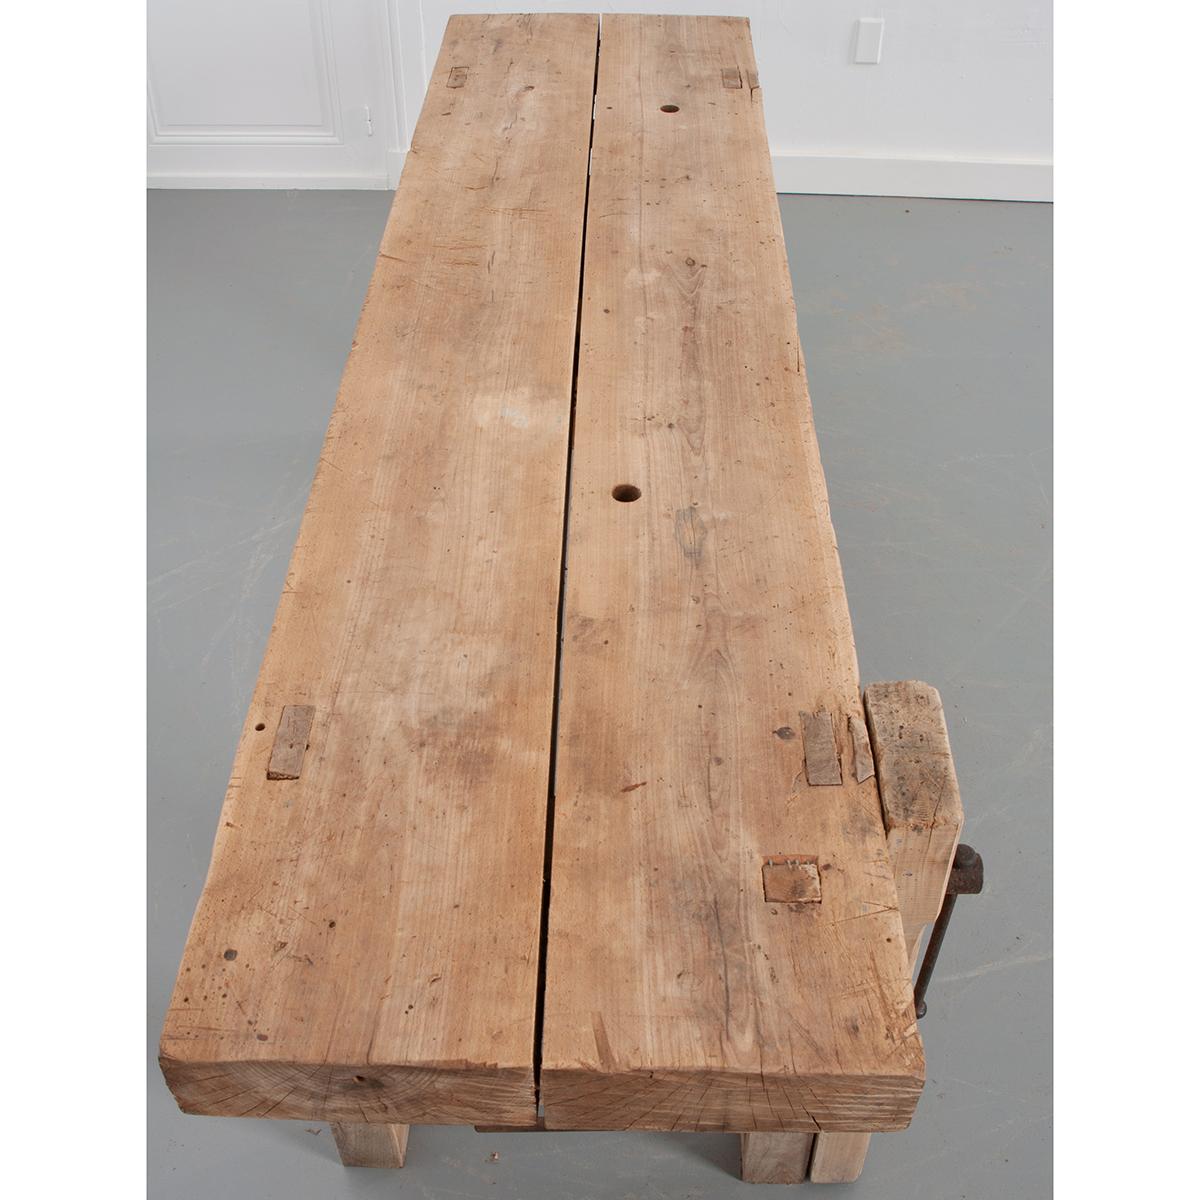 This Artisan’s bench from Burgundy France is made of unfinished beech and iron. Years of use shows on the surfaces of this table and its patina adds such character to this piece. A single drawer with drop-loop pull is offset under the work surface.